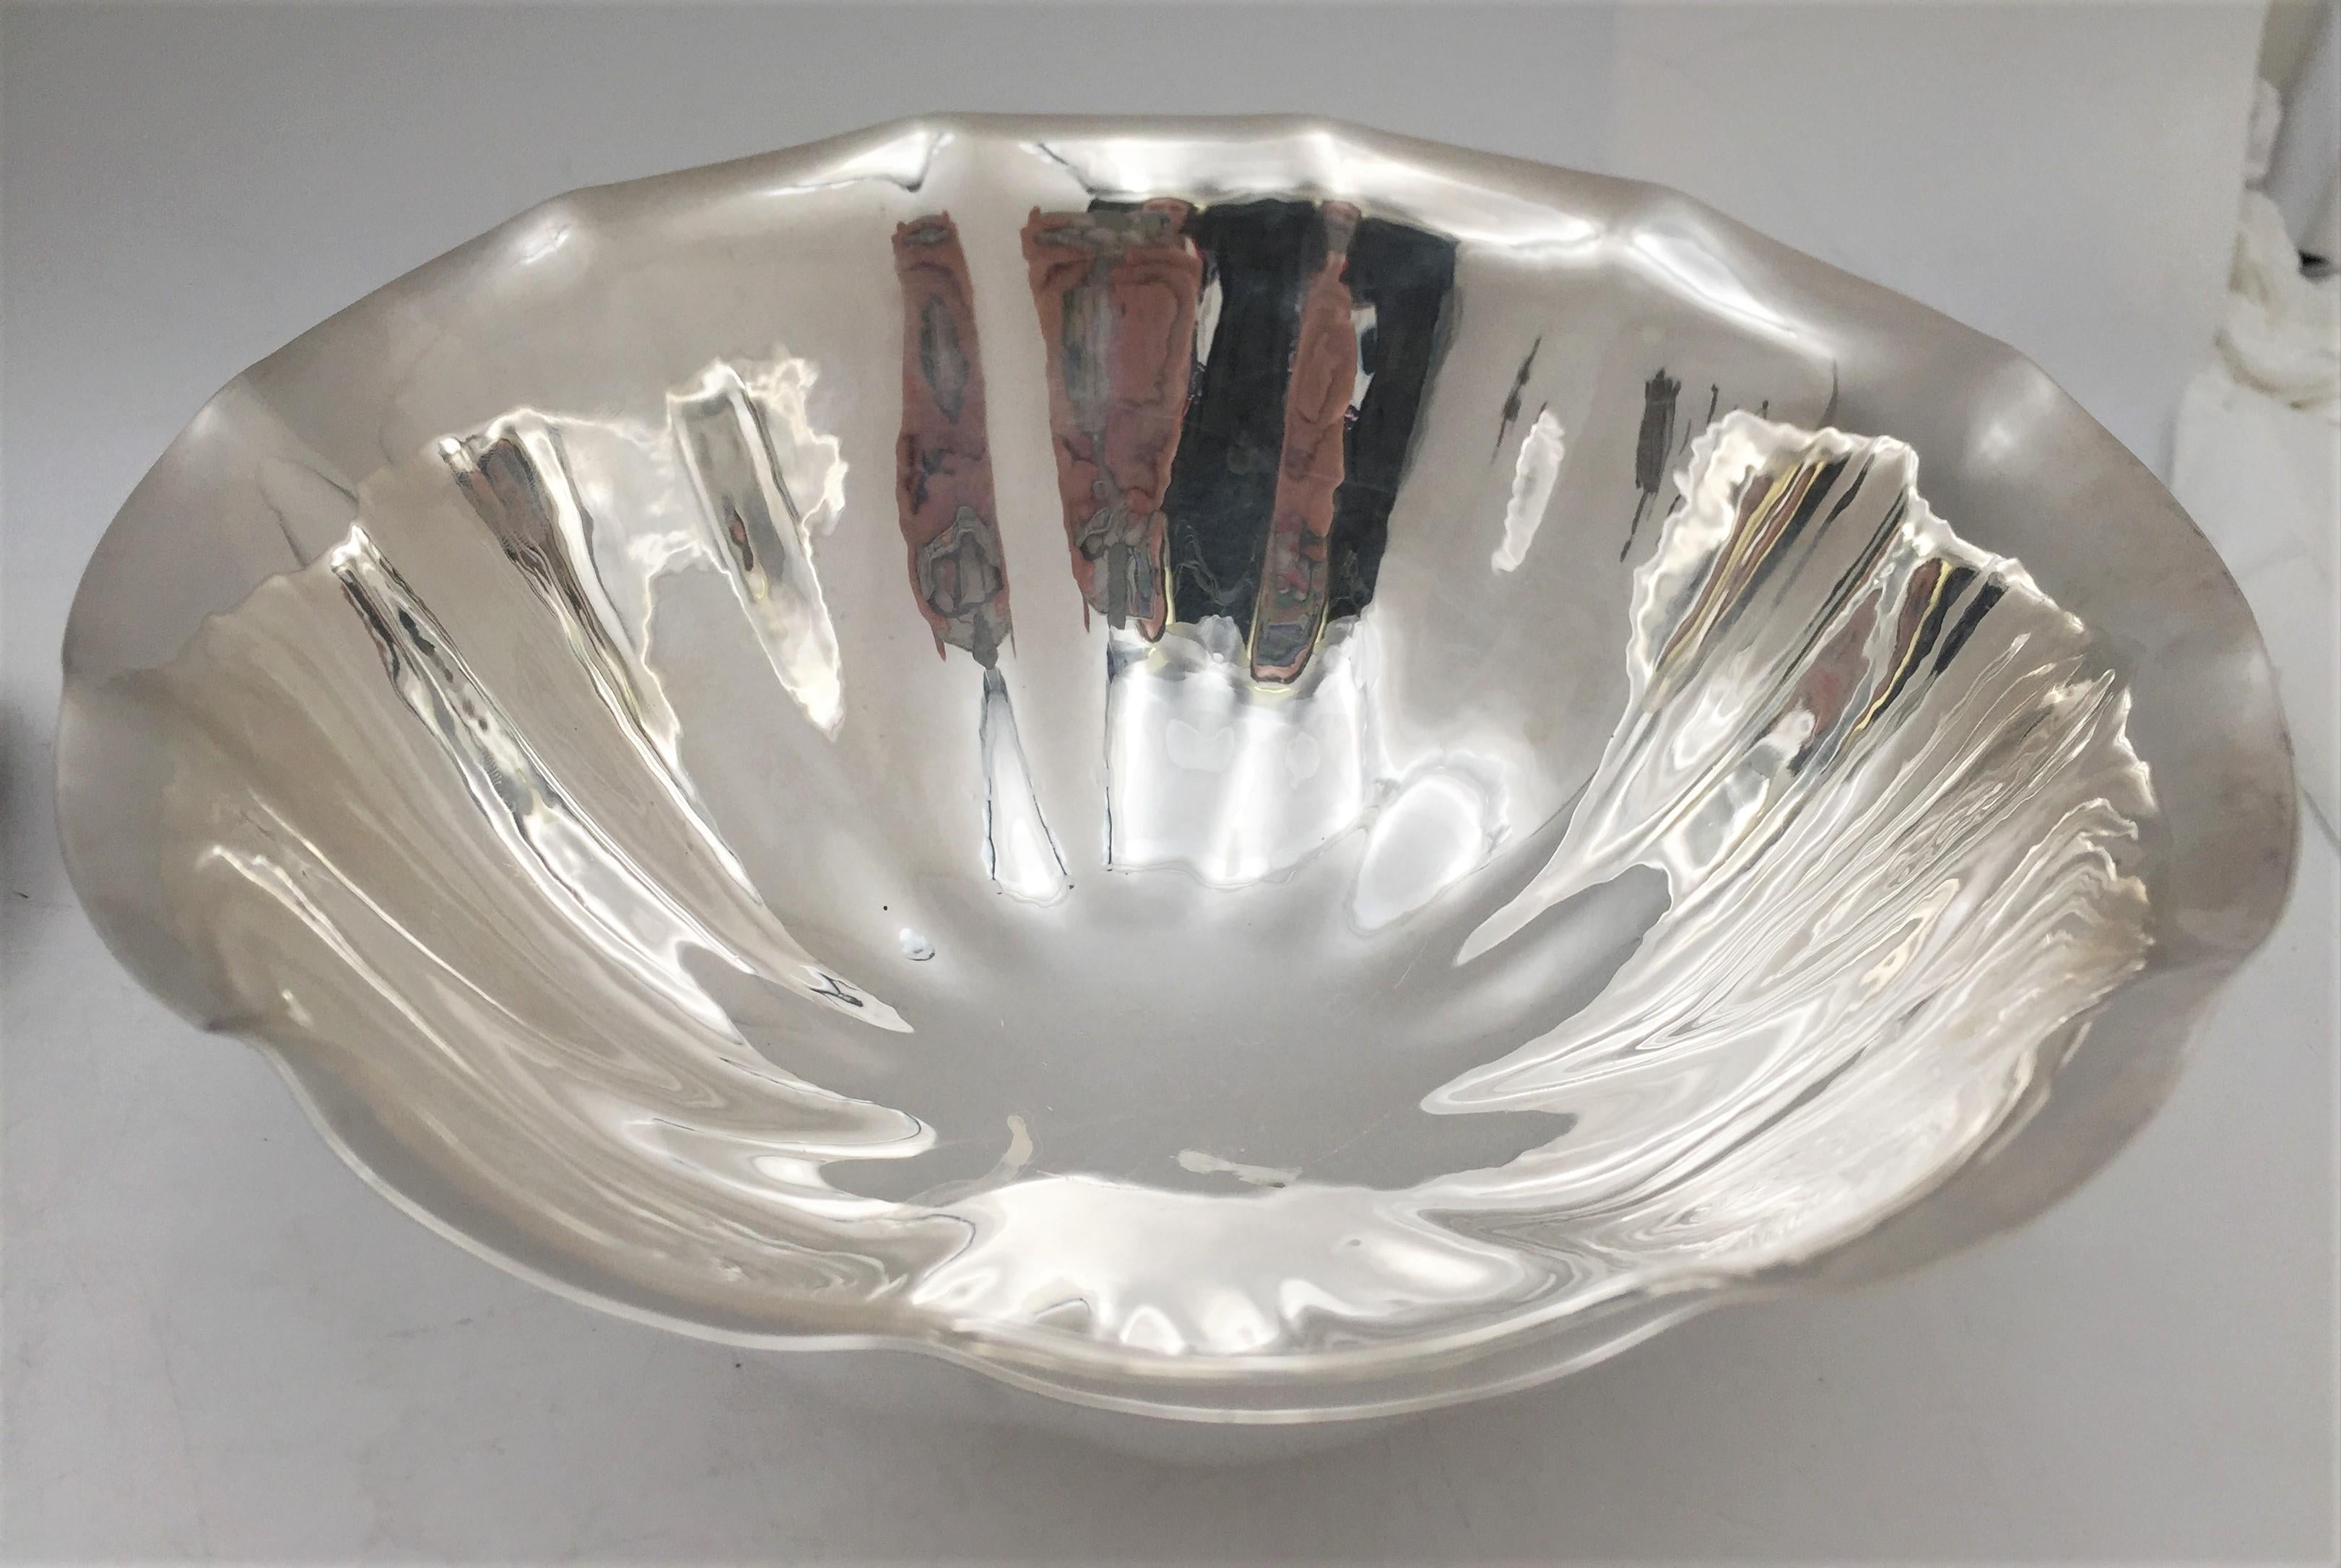 Rare Georg Jensen, sterling silver, beautifully hand hammered, multilobed bowl #522A in Mid-Century Modern style with a riveting, flowing design. It measures 8 1/2'' in diameter by 4'' in height (elegant proportions), weighs 17.1 troy ounces, and